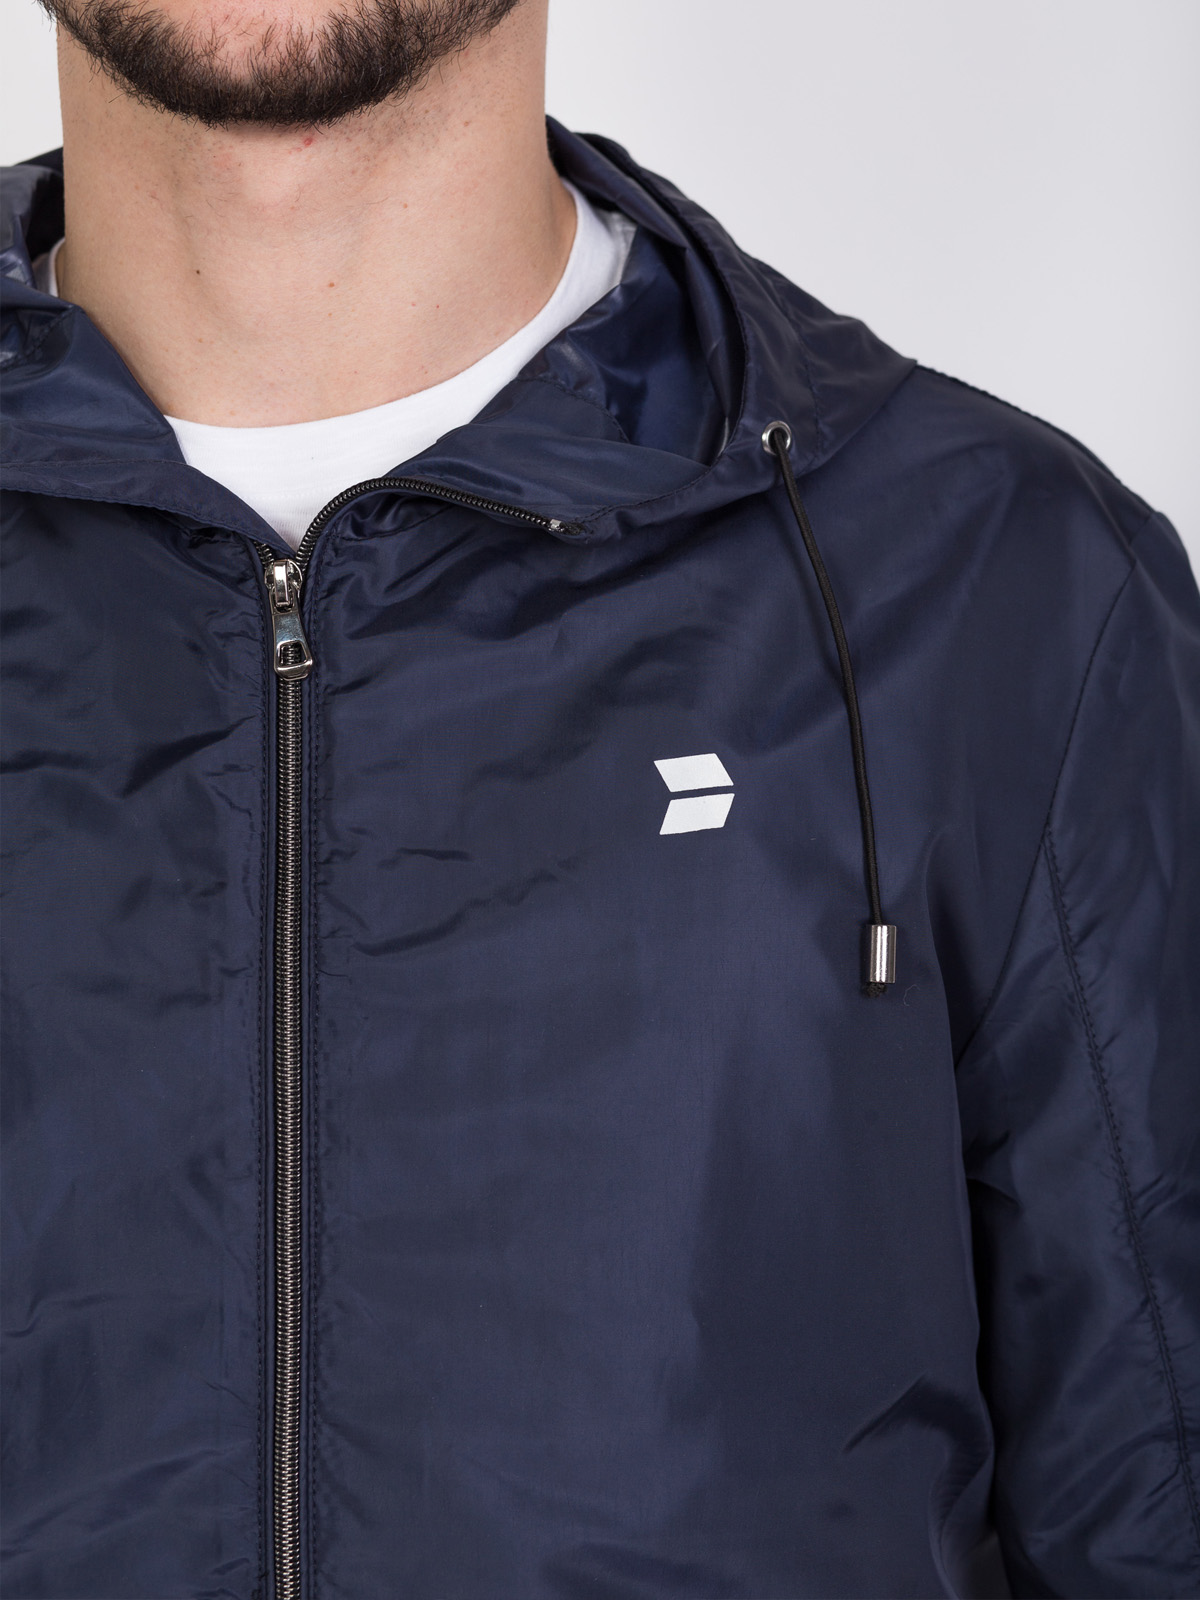 Sports mens jacket with hood blue - 66024 € 55.68 img3